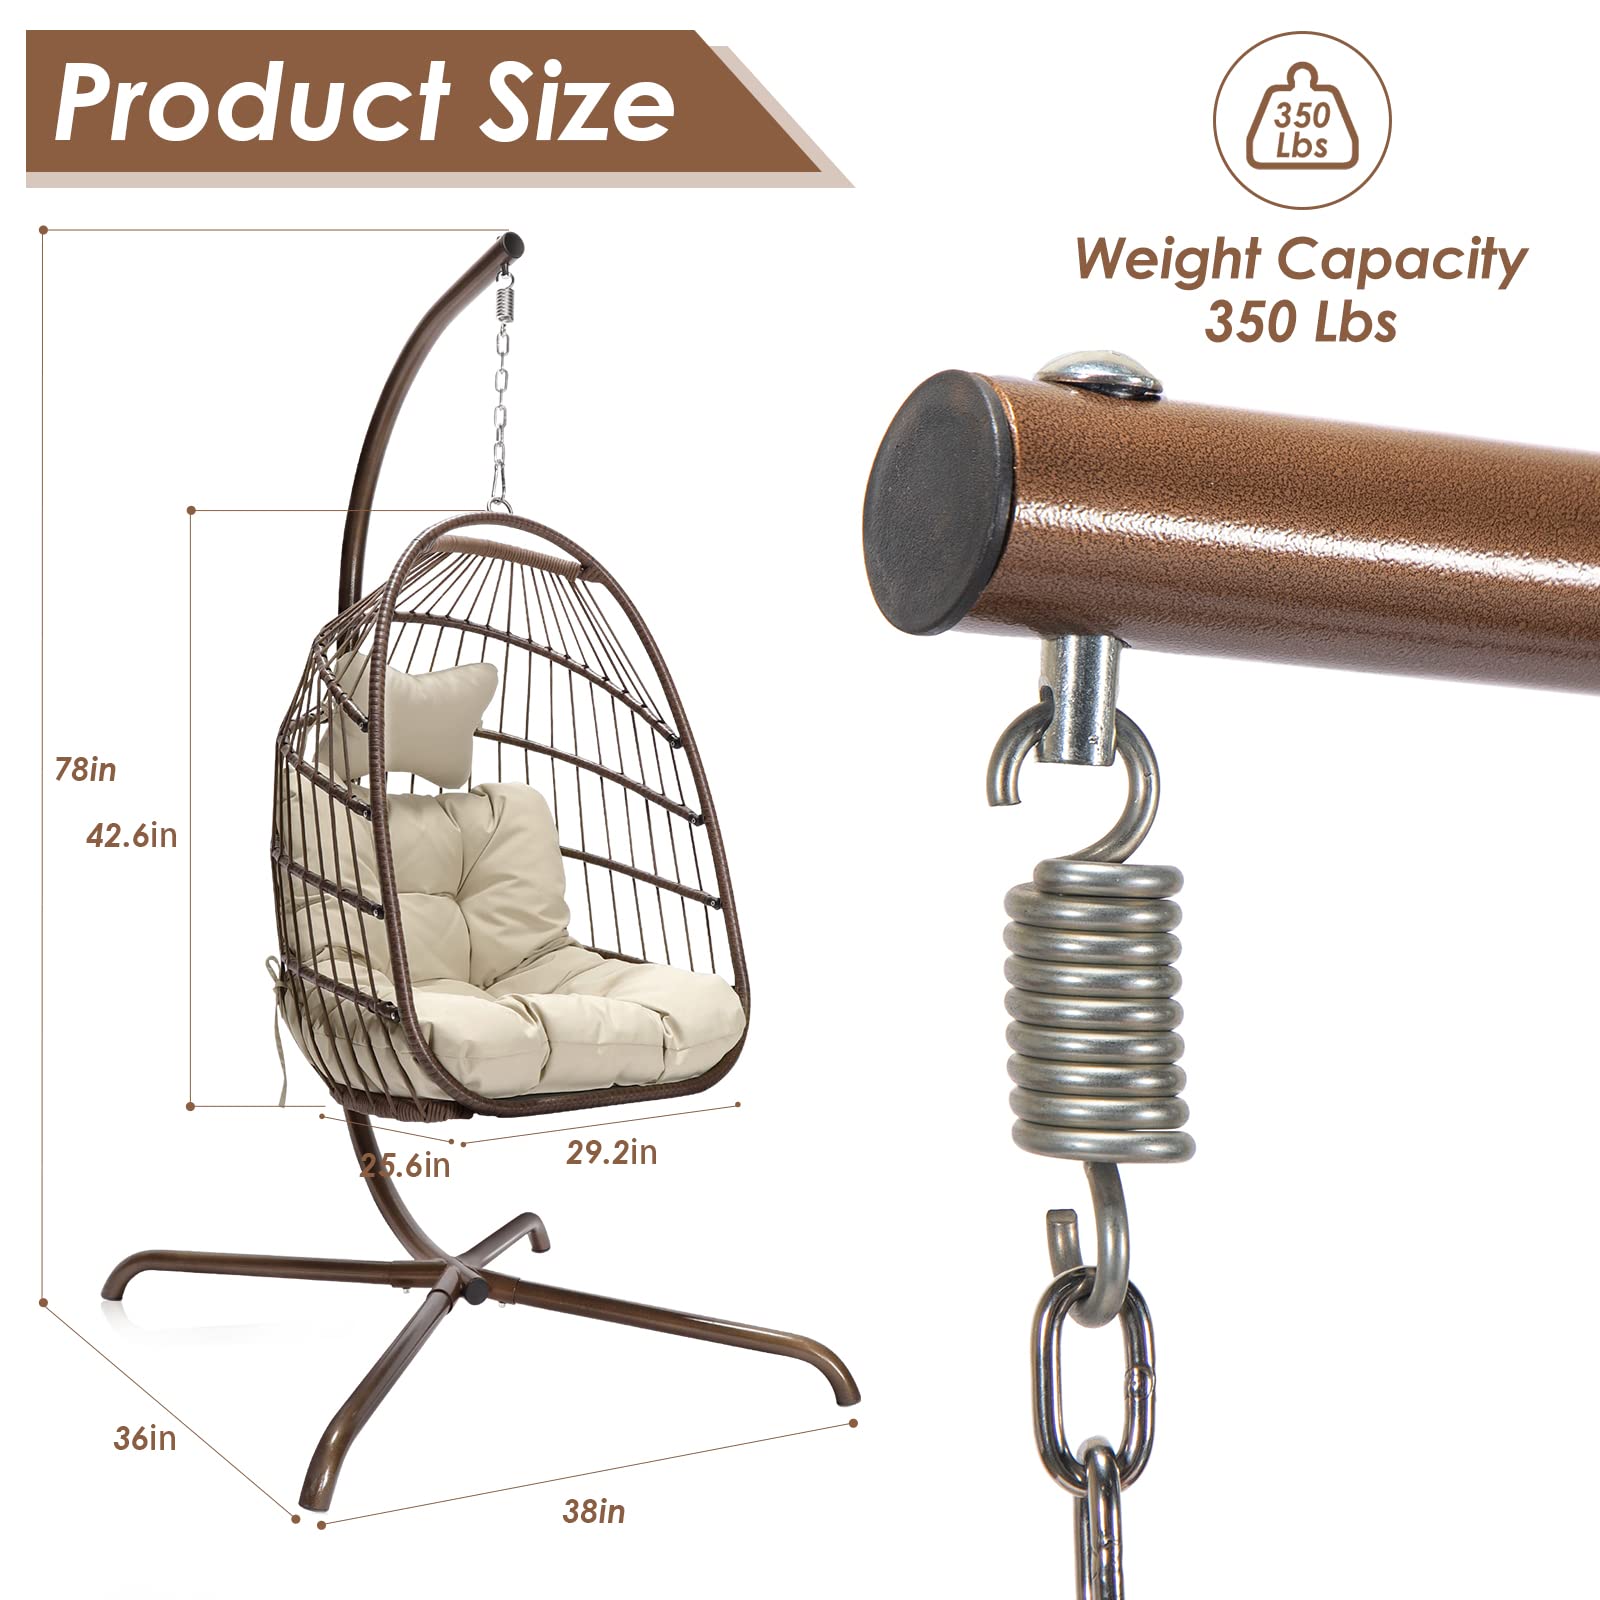 Nicesoul Foldable PE Wicker Brown Hanging Egg Chair With Stand Swing Chair With Cushion and Pillow Capacity 350lbs - image 3 of 8